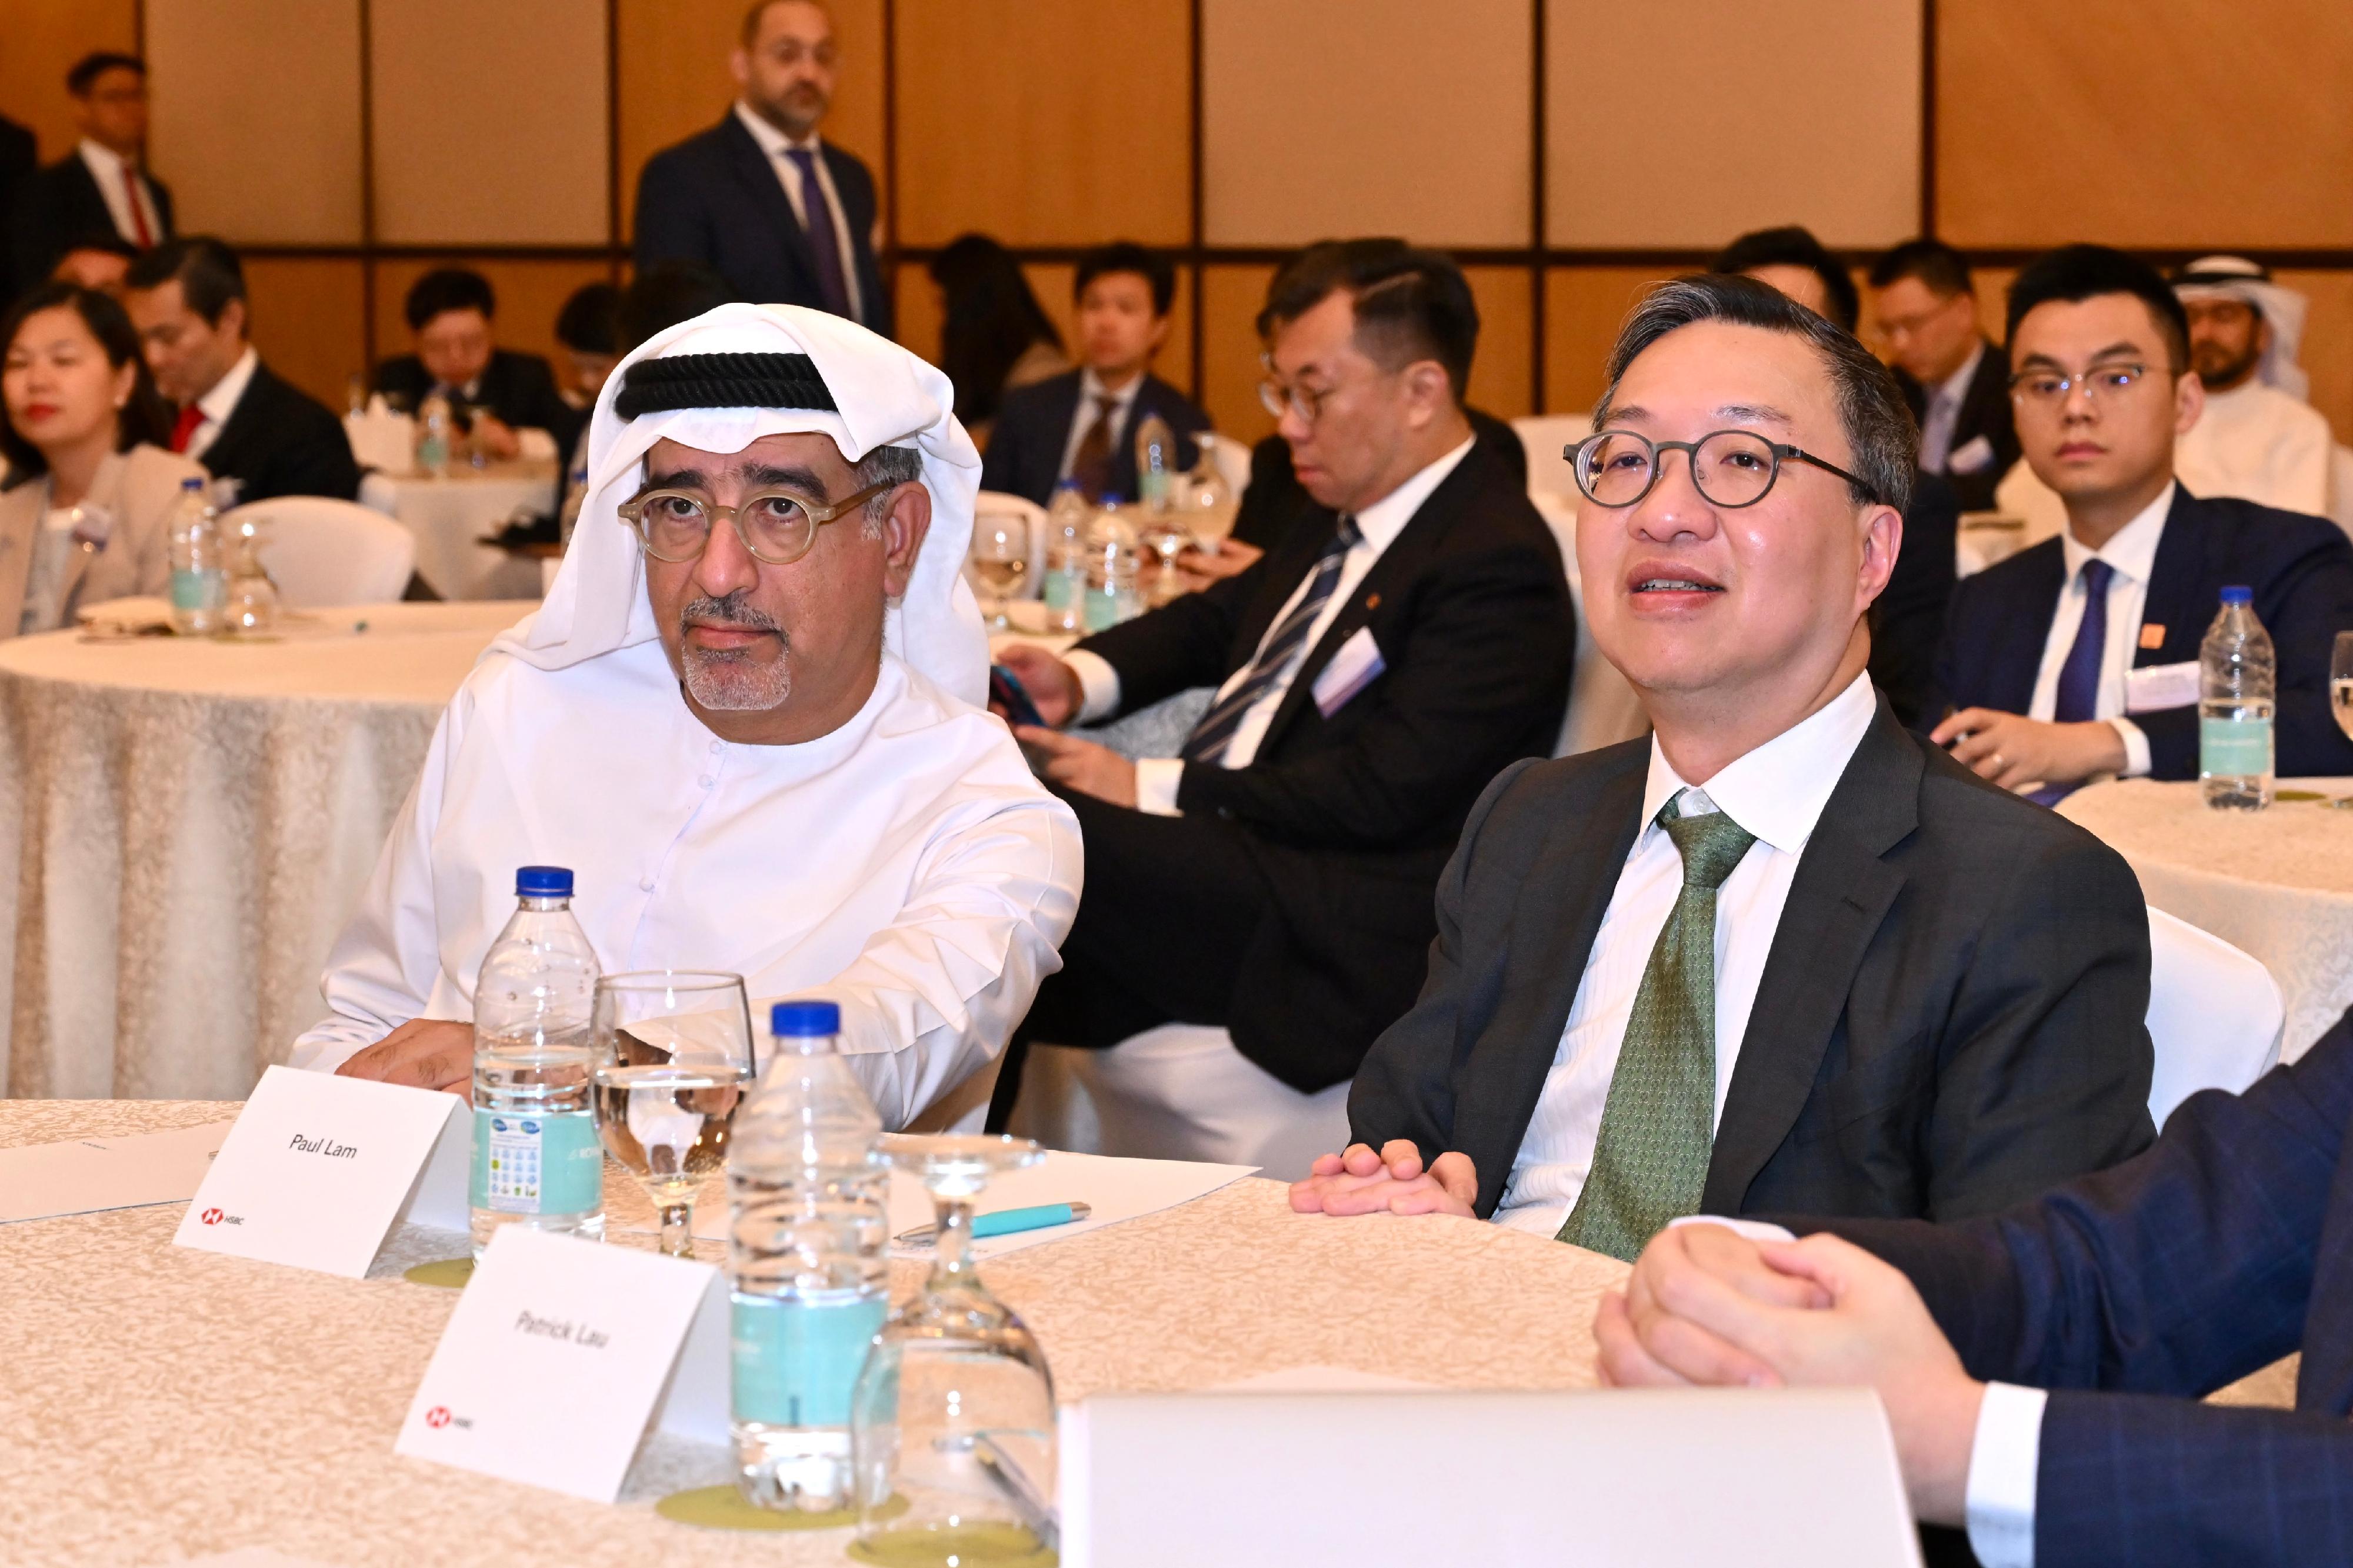 The Secretary for Justice, Mr Paul Lam, SC, started his visit programme to Abu Dhabi, the United Arab Emirates (UAE), today (May 21, Abu Dhabi time) with his about 30-strong delegation, comprising representatives from the Law Society of Hong Kong, the Hong Kong Bar Association, the Hong Kong Exchanges and Clearing Limited, Invest Hong Kong and related sectors. Photo shows Mr Lam (right), accompanied by the Chairman of the Board of HSBC Bank Middle East, Mr Abdulfattah Sharaf (left), at a market briefing by the bank to gain a better understanding of the UAE financial sector's demand for legal services.

